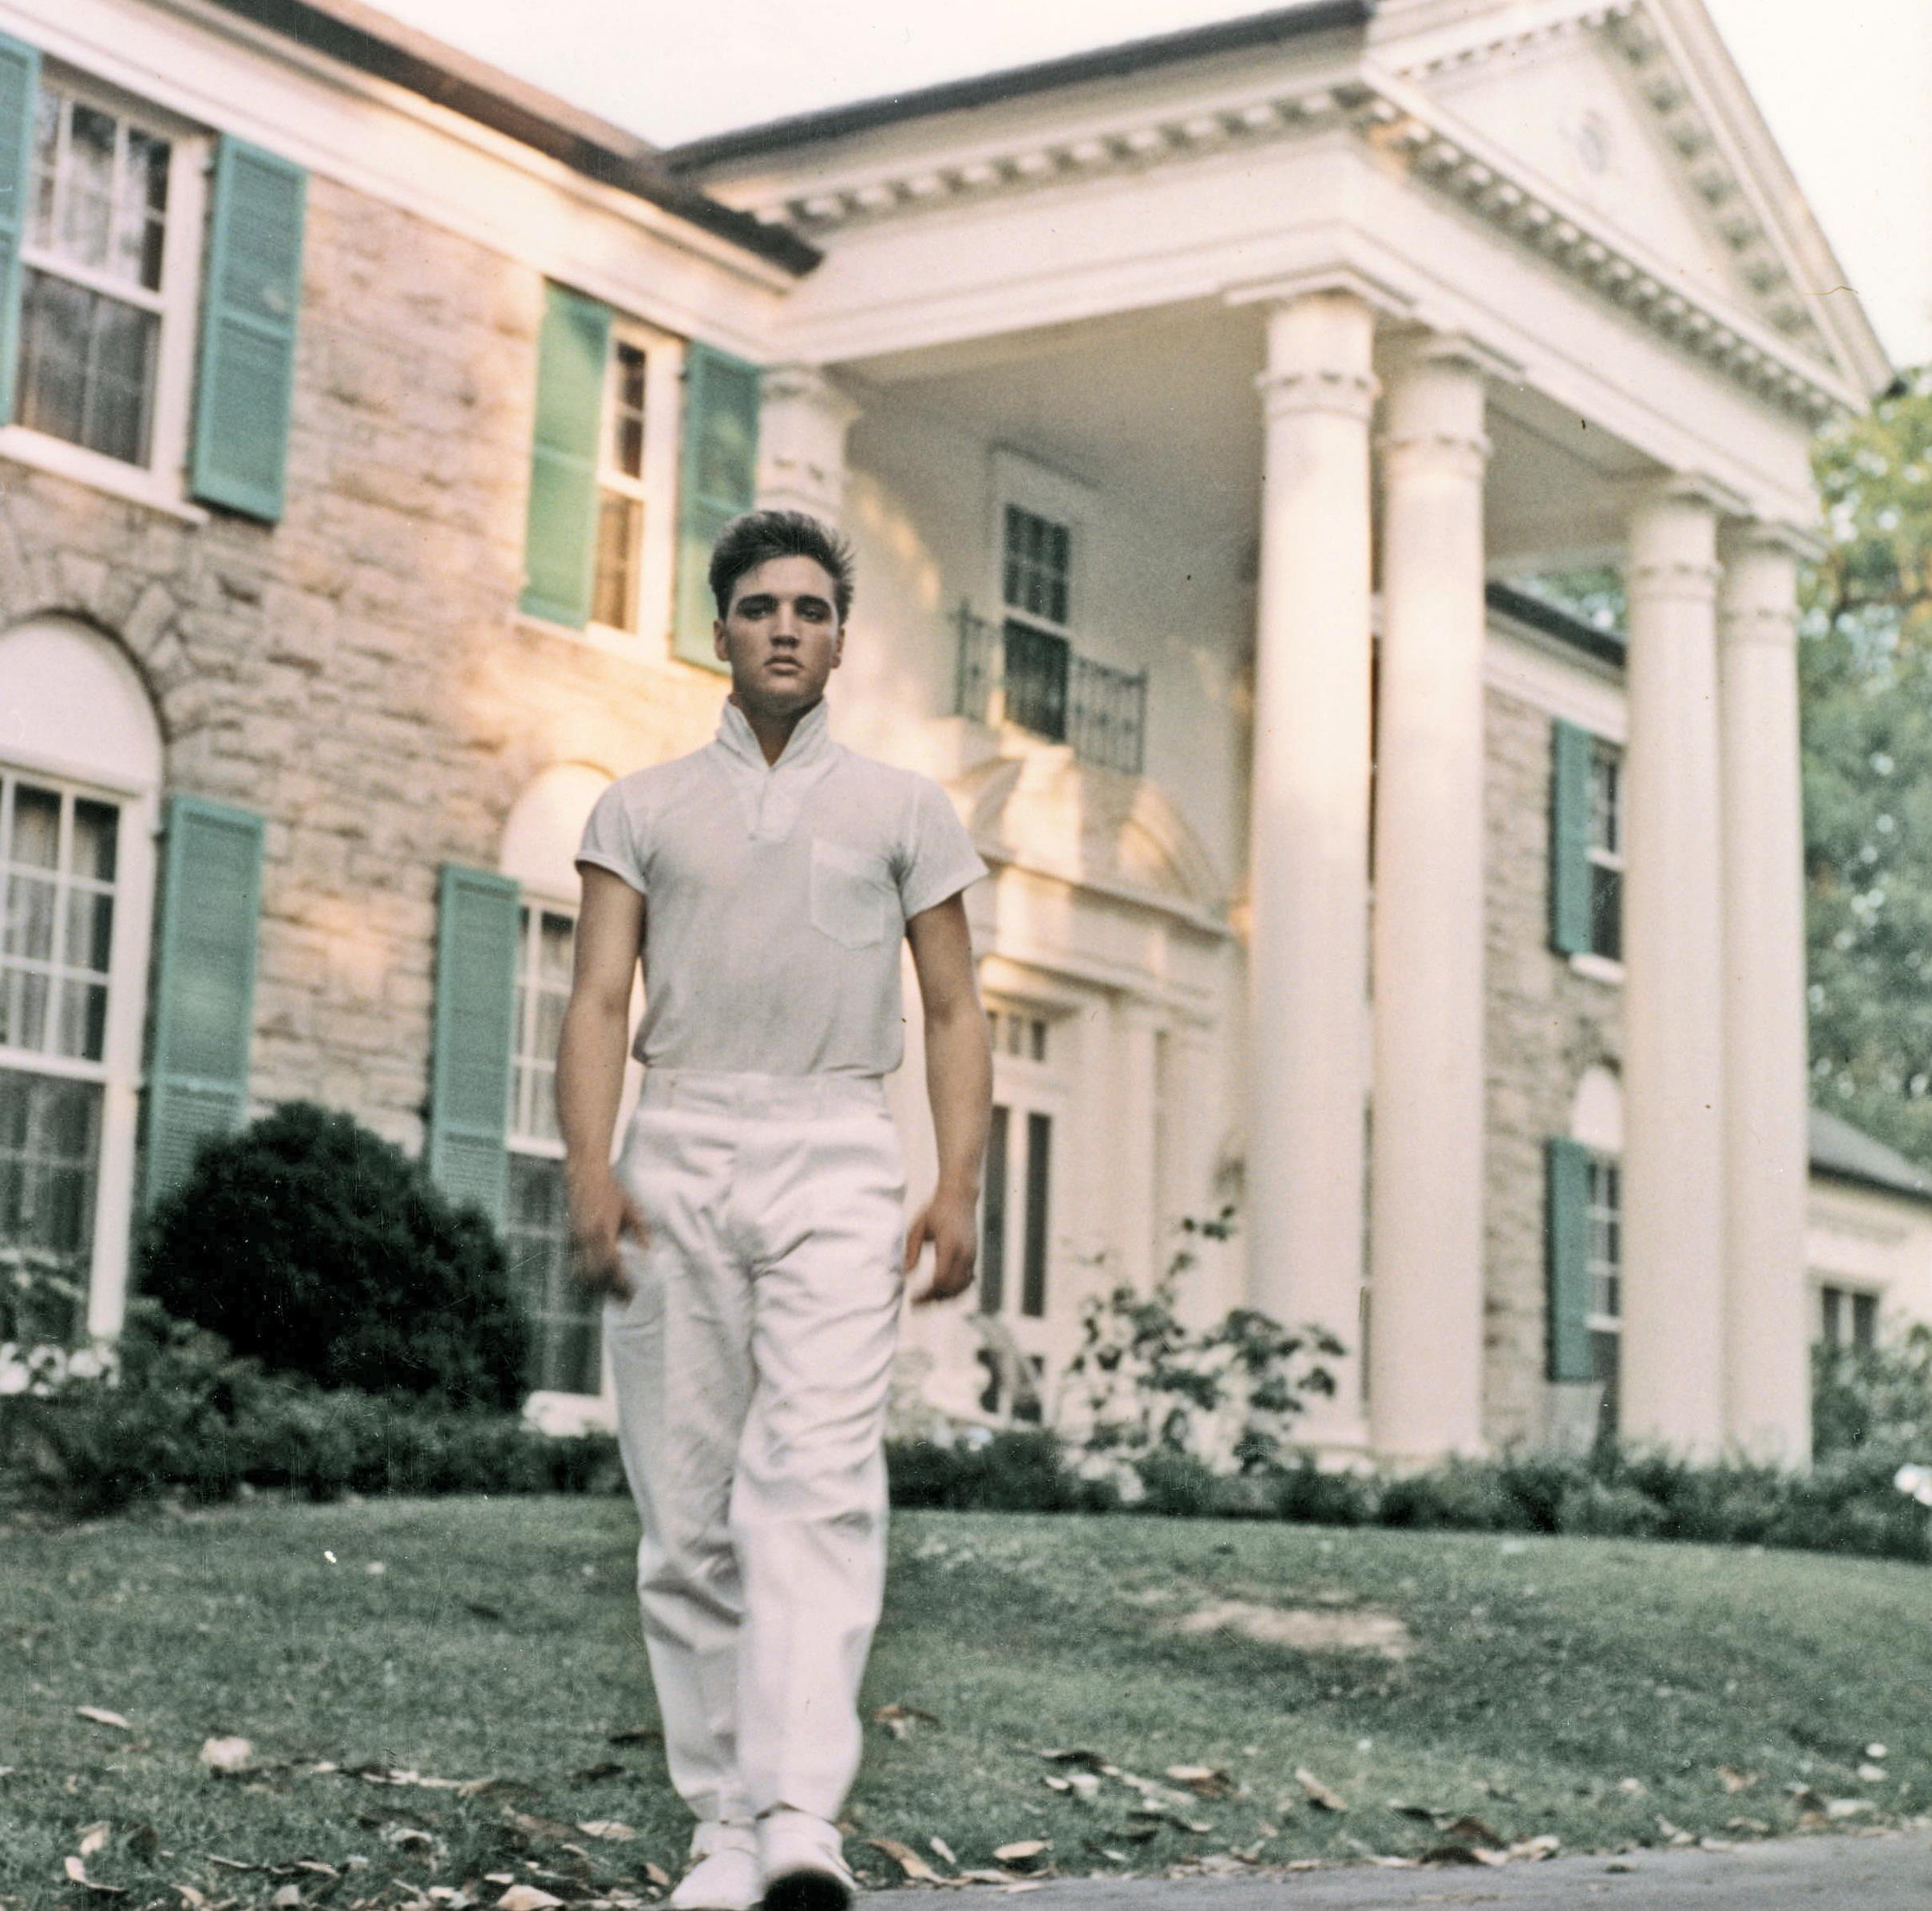 Elvis Presley standing on the grass in front of Graceland